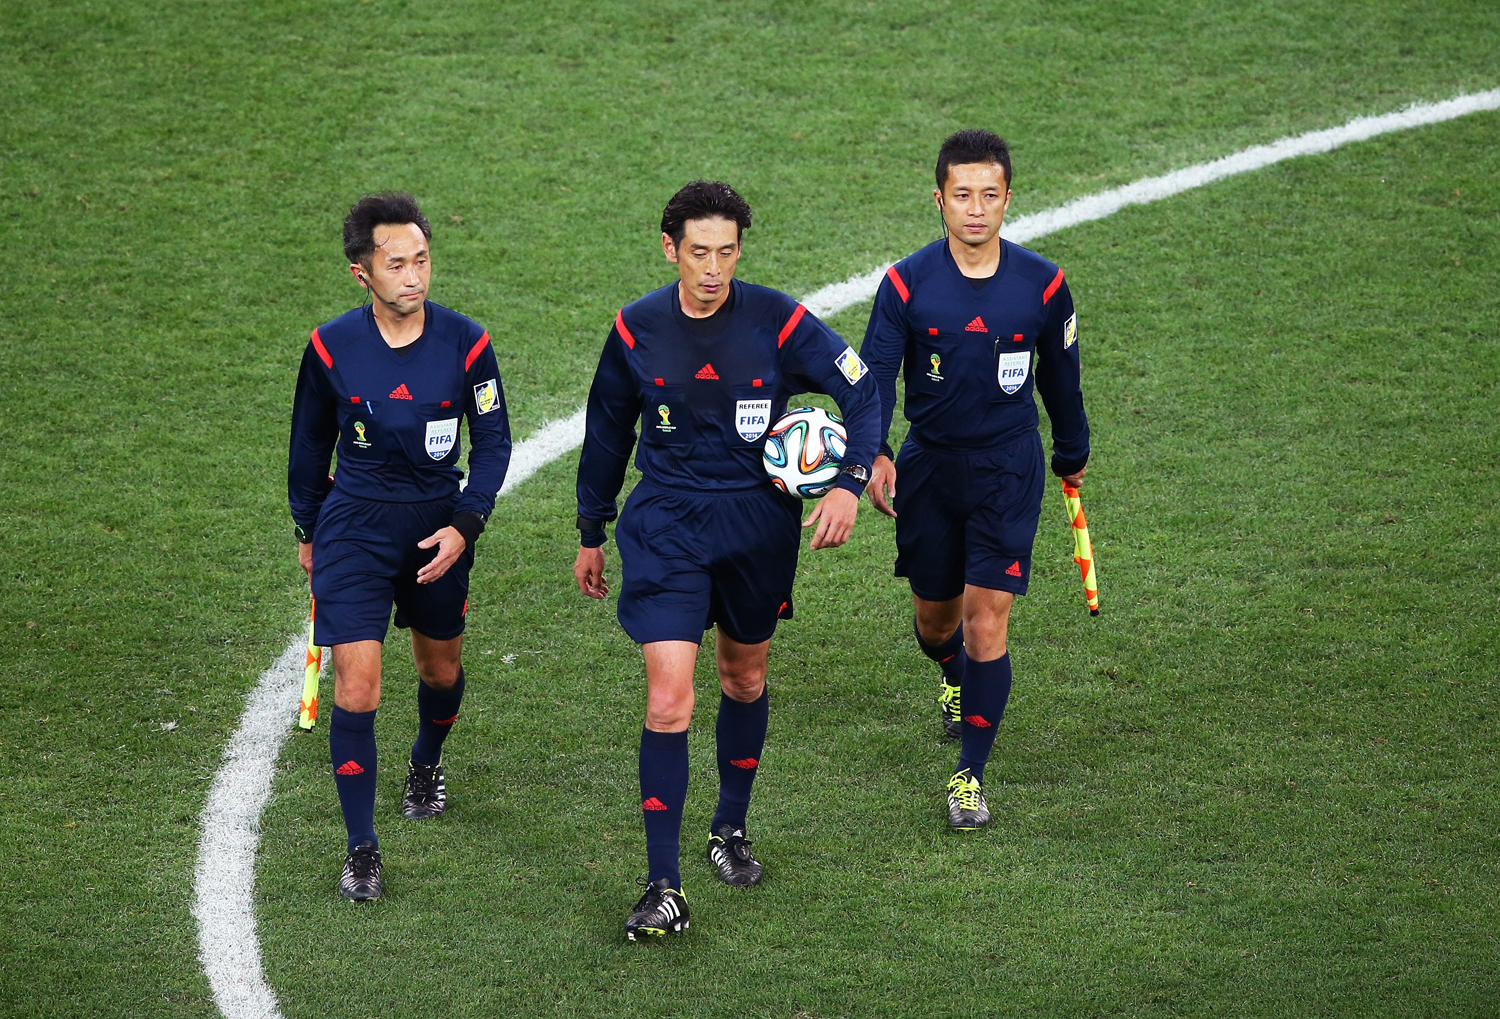 Assistant referee Toshiyuki Nagi, referee Yuichi Nishimura and assistant referee Toru Sagara of Japan walk on the field at the end of the match during the 2014 FIFA World Cup Brazil Group A match between Brazil and Croatia at Arena de Sao Paulo on June 12, 2014 in Sao Paulo.